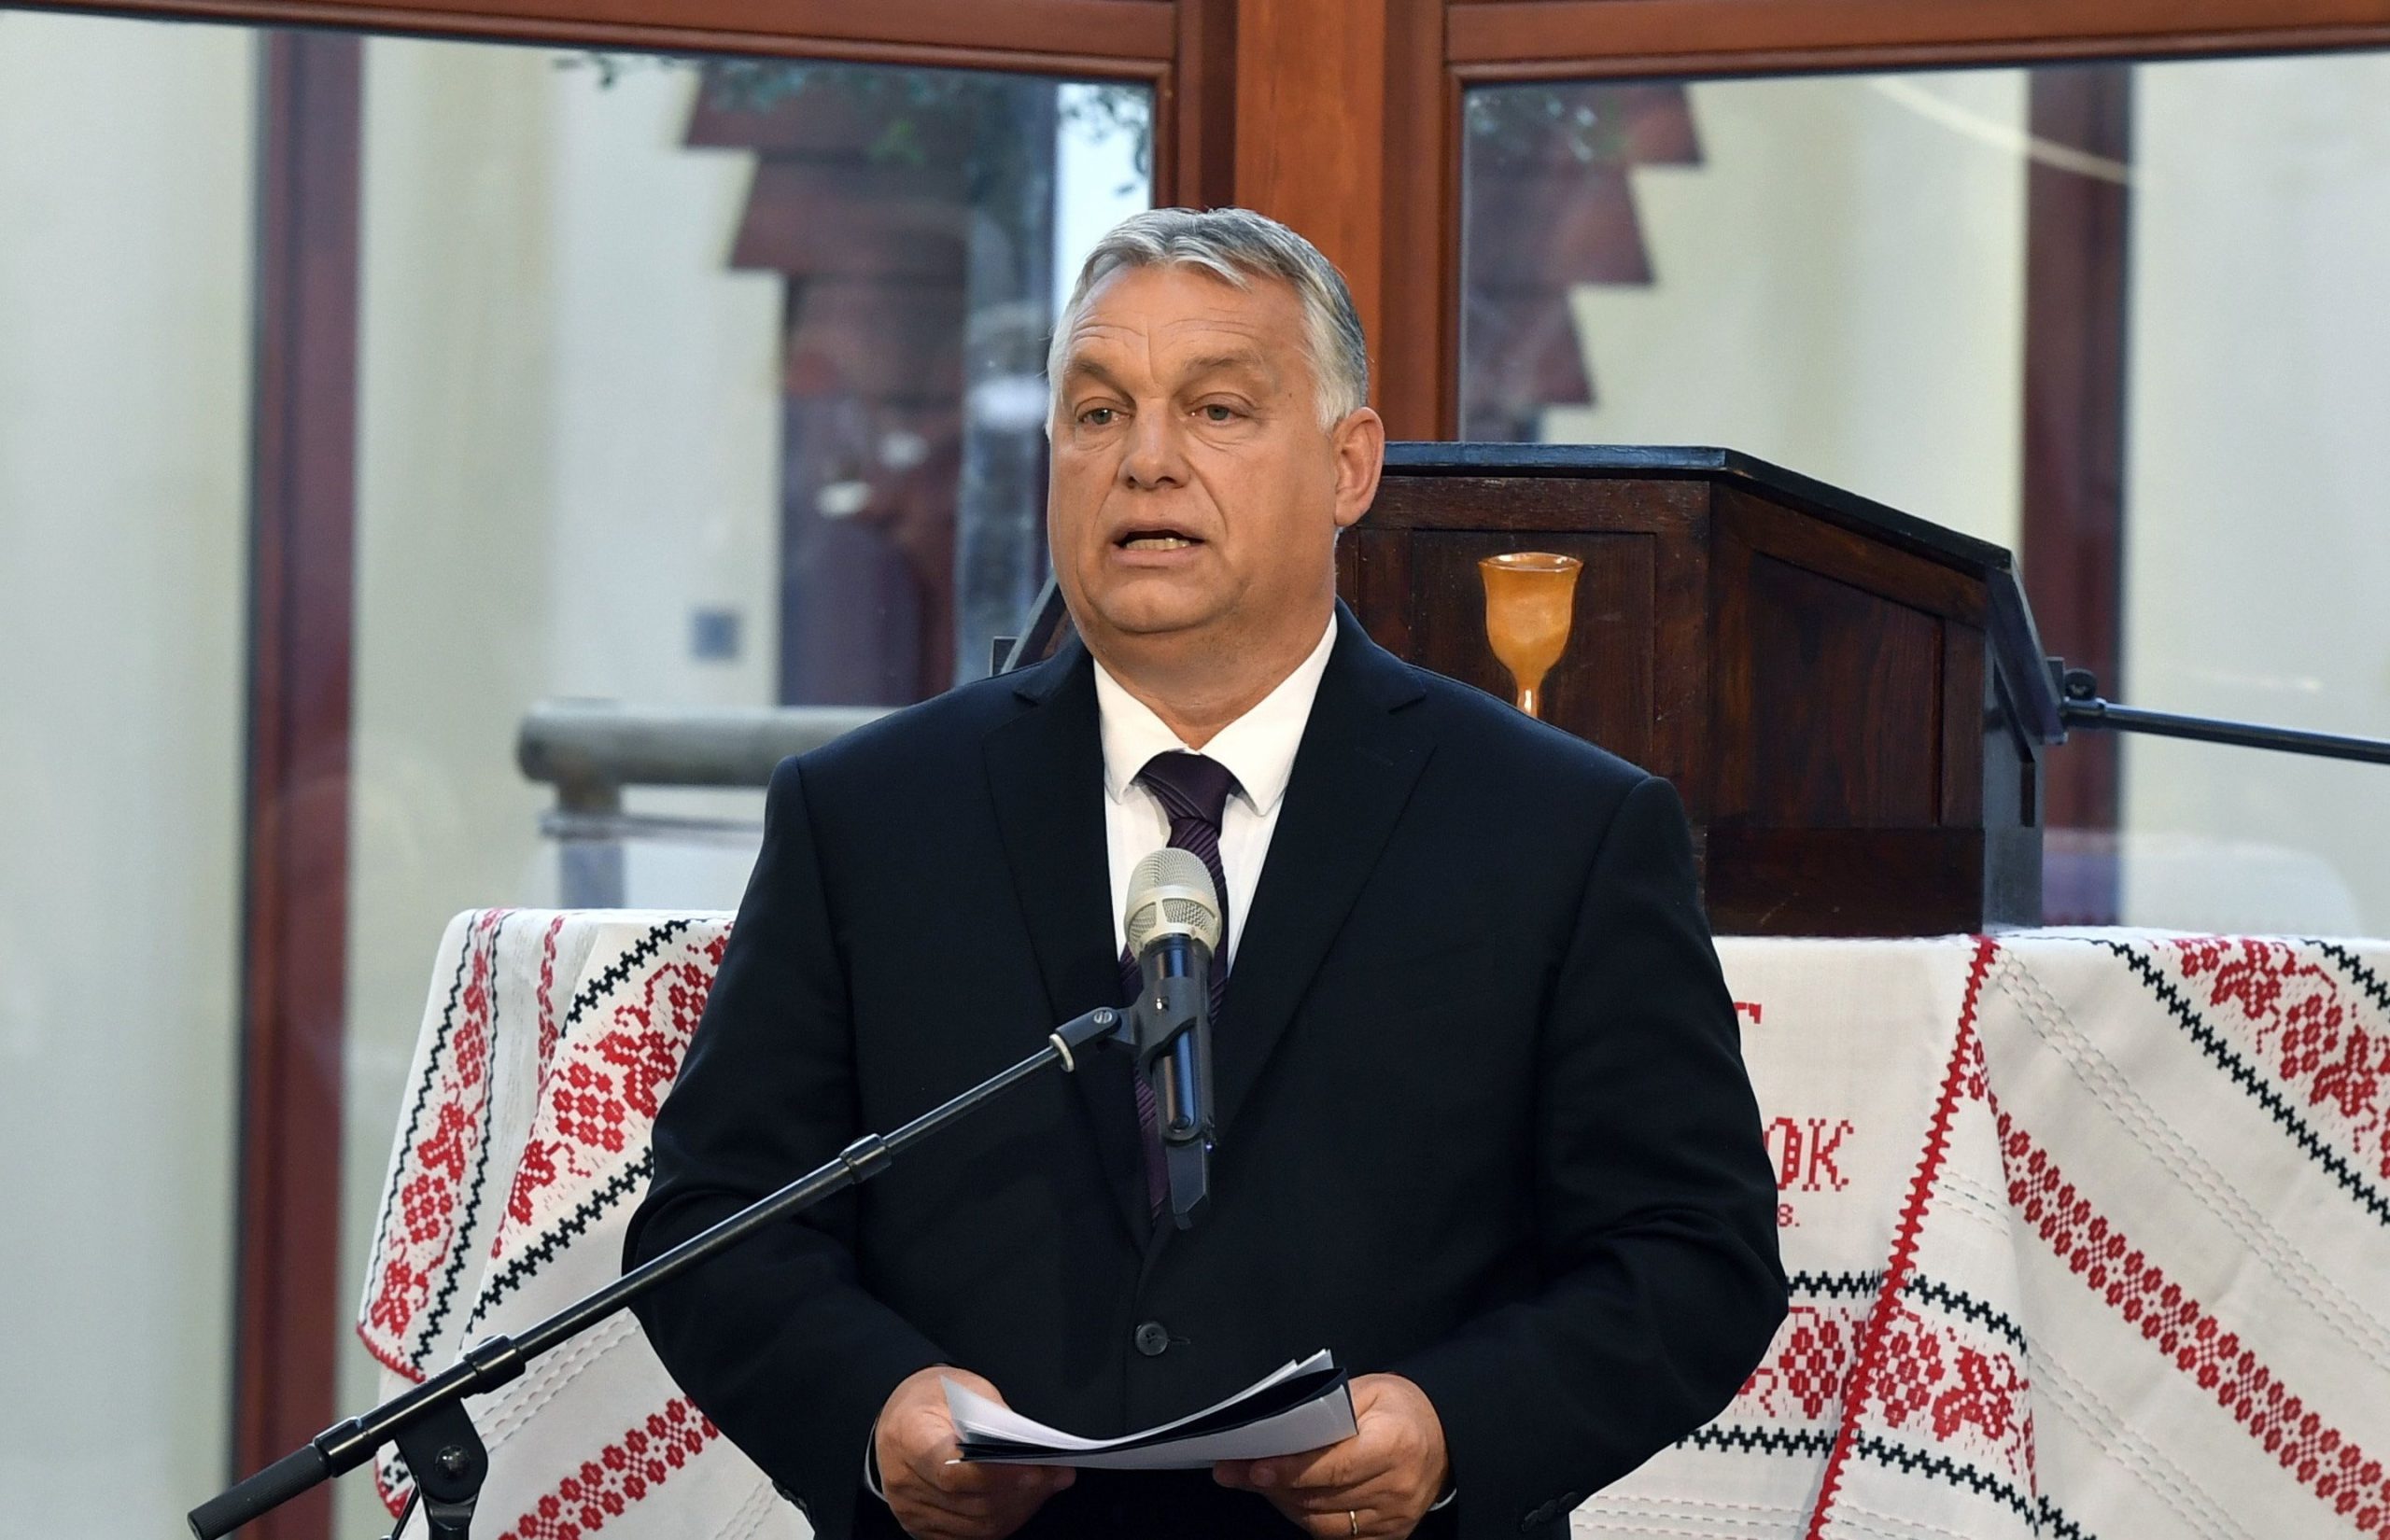 PM Orbán: Hungarians Can Only Survive as Christians, Each New Church 'Bastion in Nation's Struggle for Freedom and Greatness'